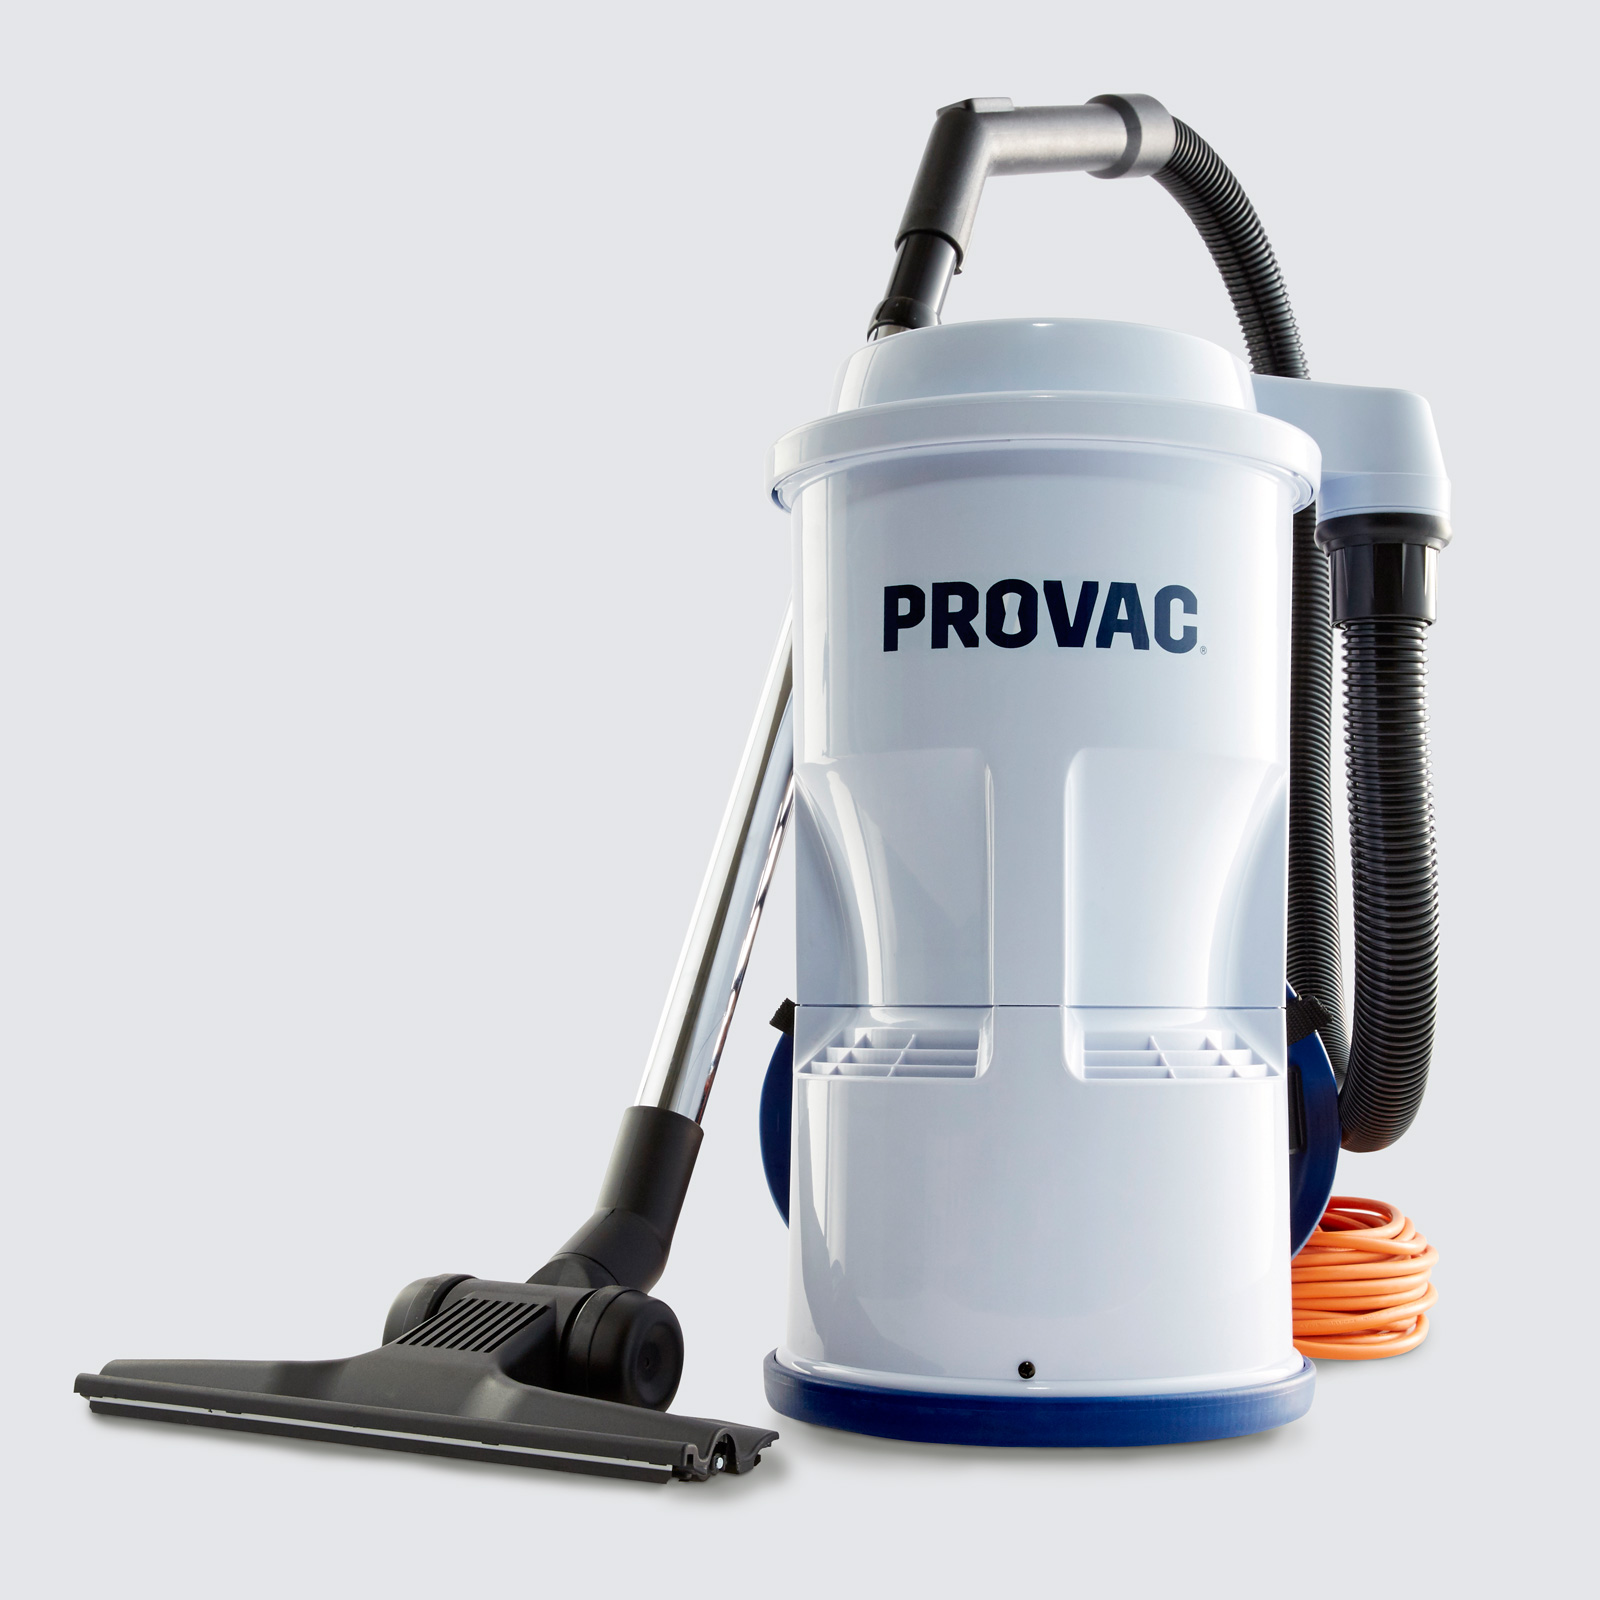 Provac Features - Lightweight Backpack Vacuum Cleaner